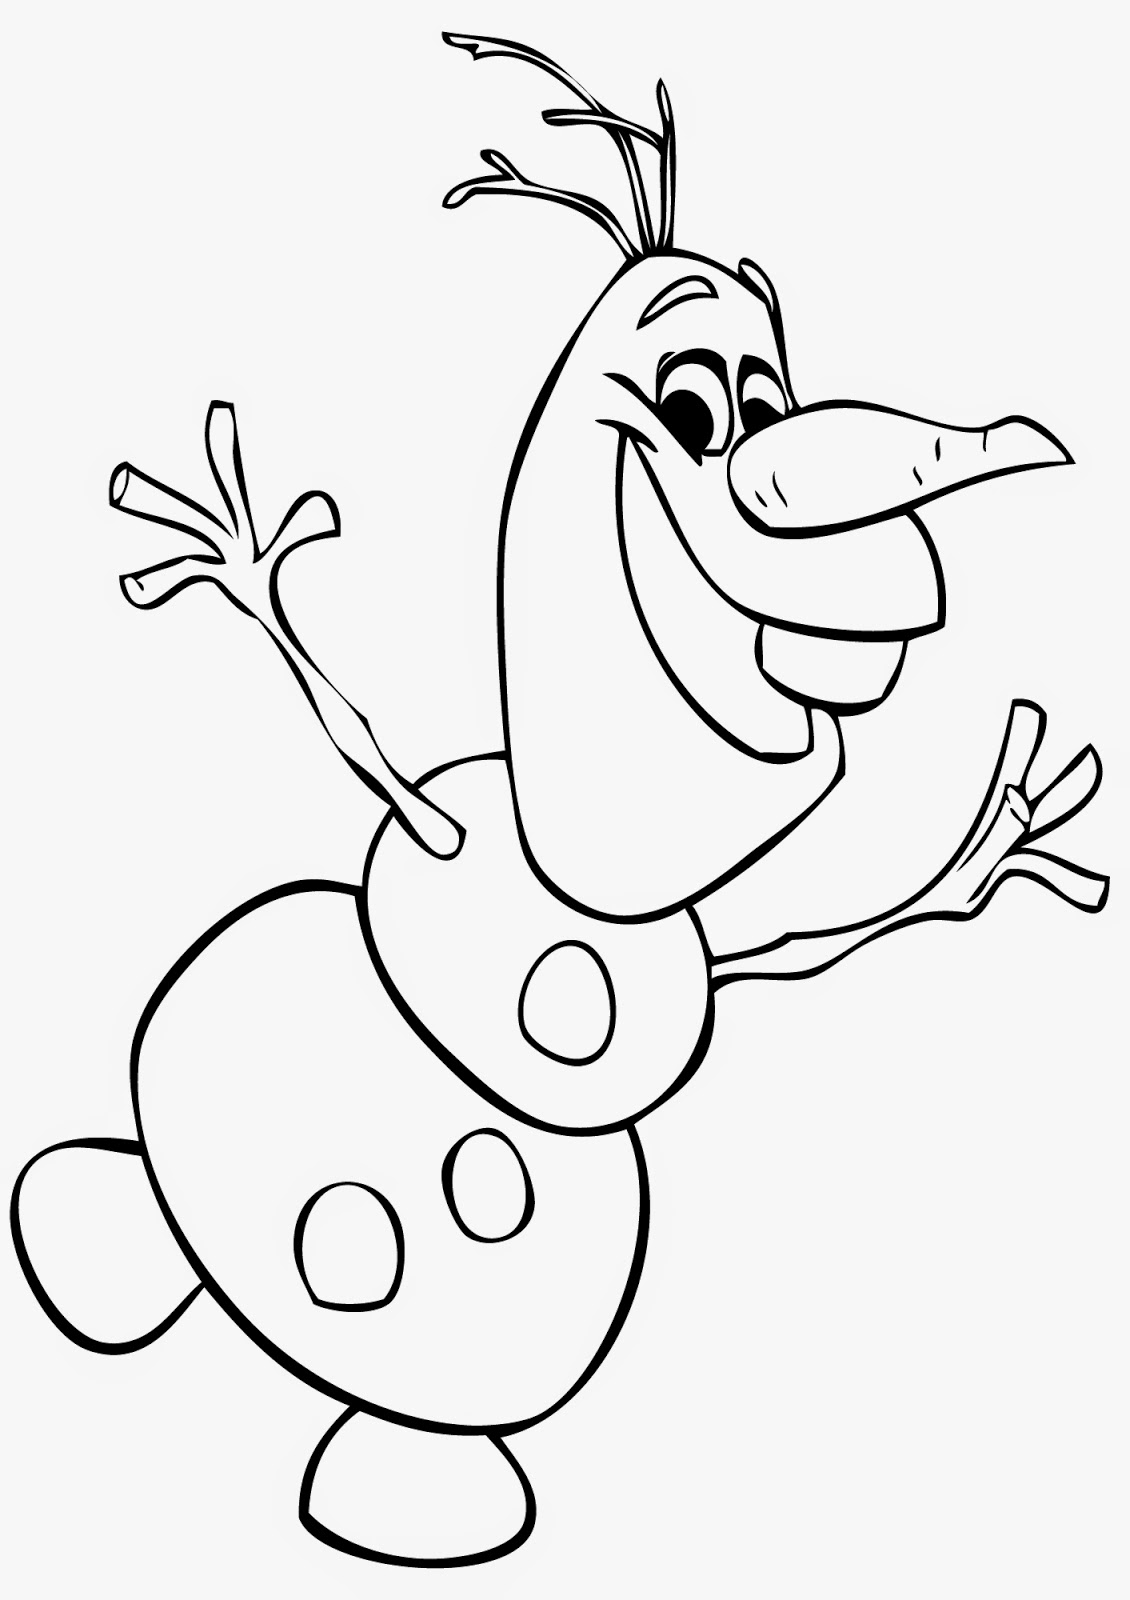 Olaf Snowman Coloring Page   Only Coloring Pages